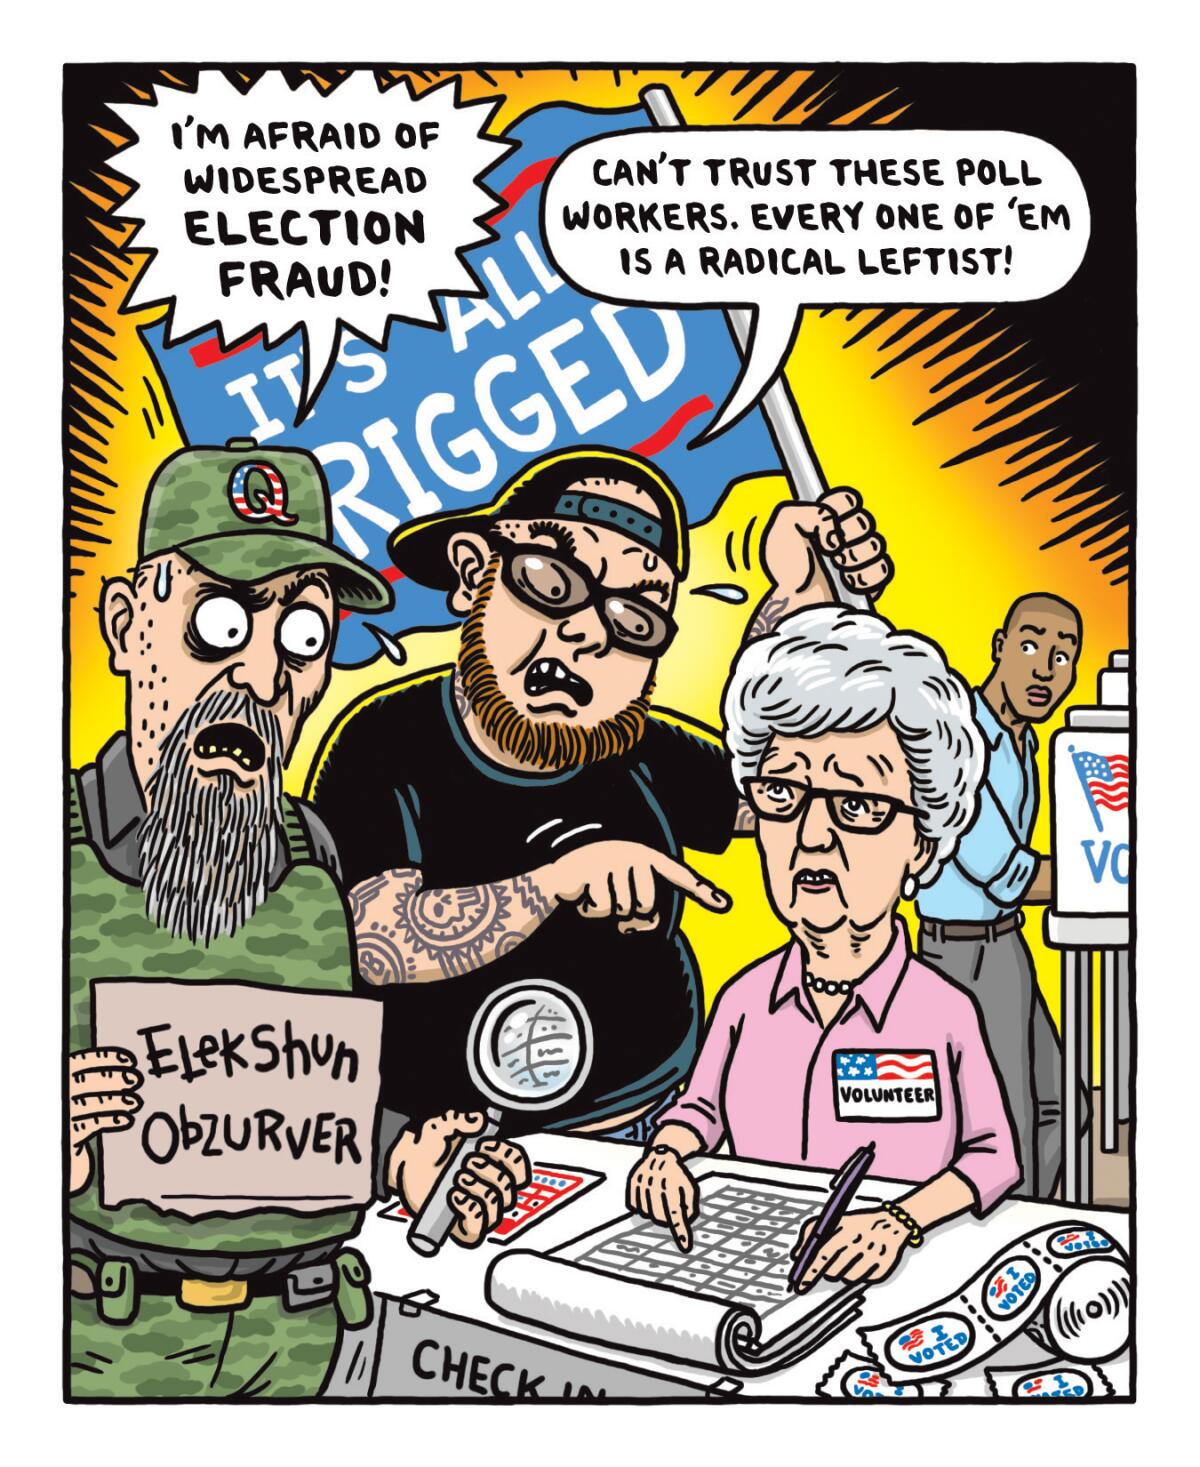 Illustration of two men protesting the election and harassing an elderly woman who is volunteering at the voting polls